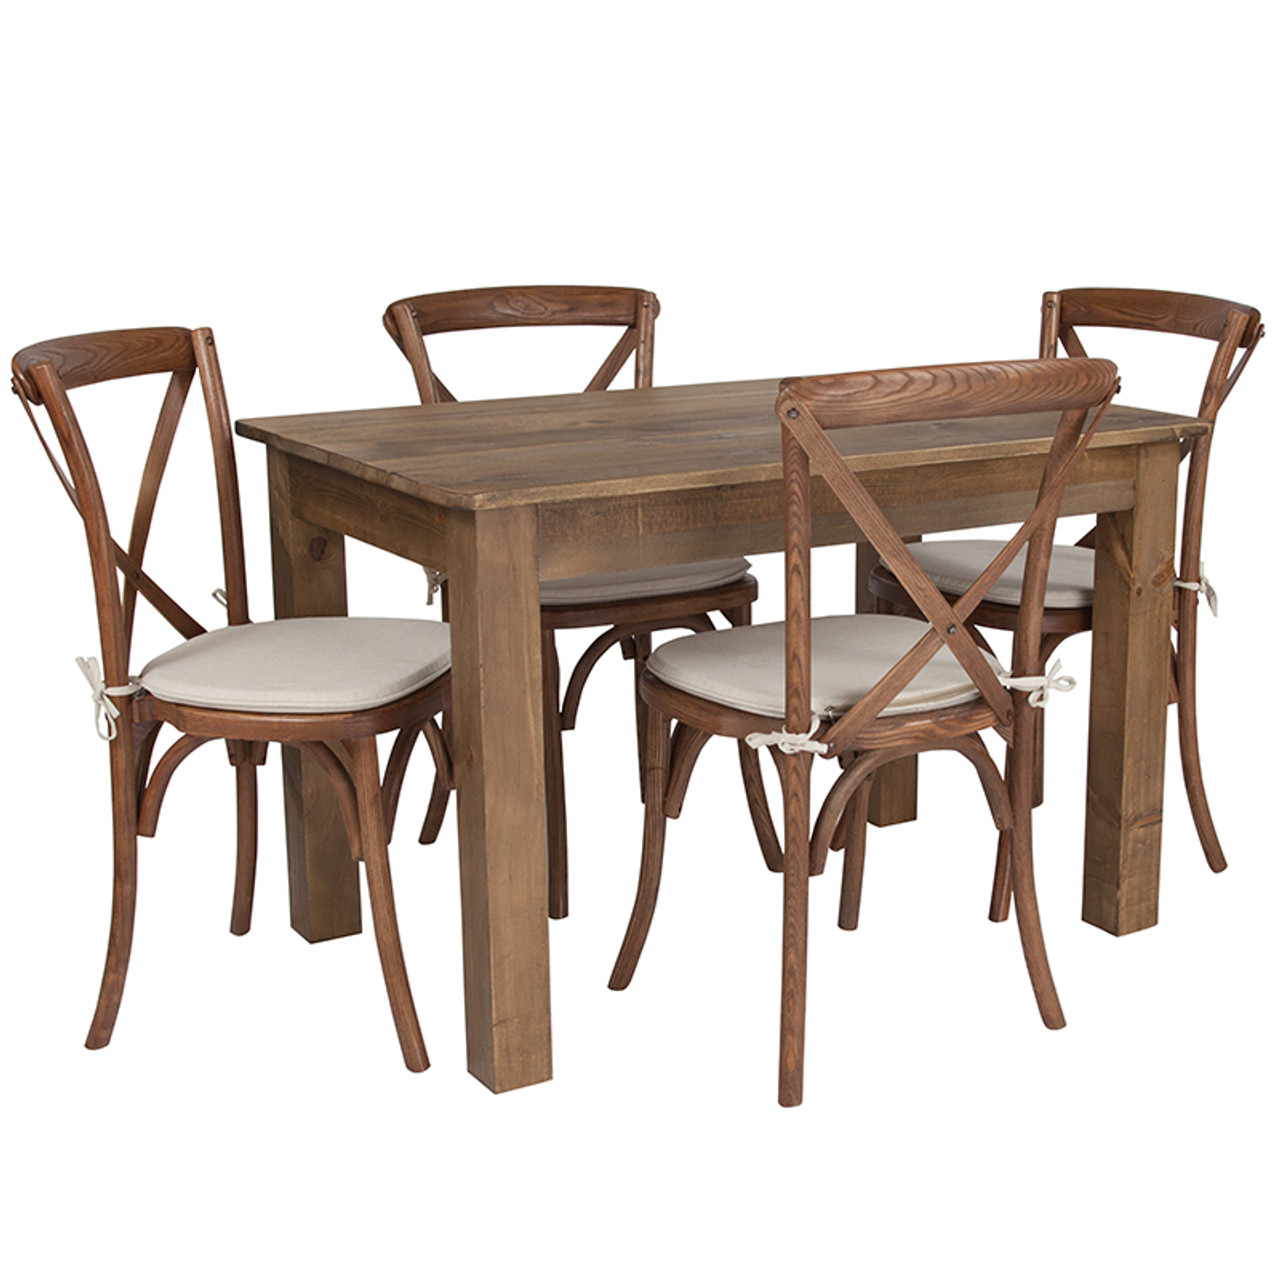 46 X 30 Antique Rustic Farm Table Set With 4 Cross Back Chairs